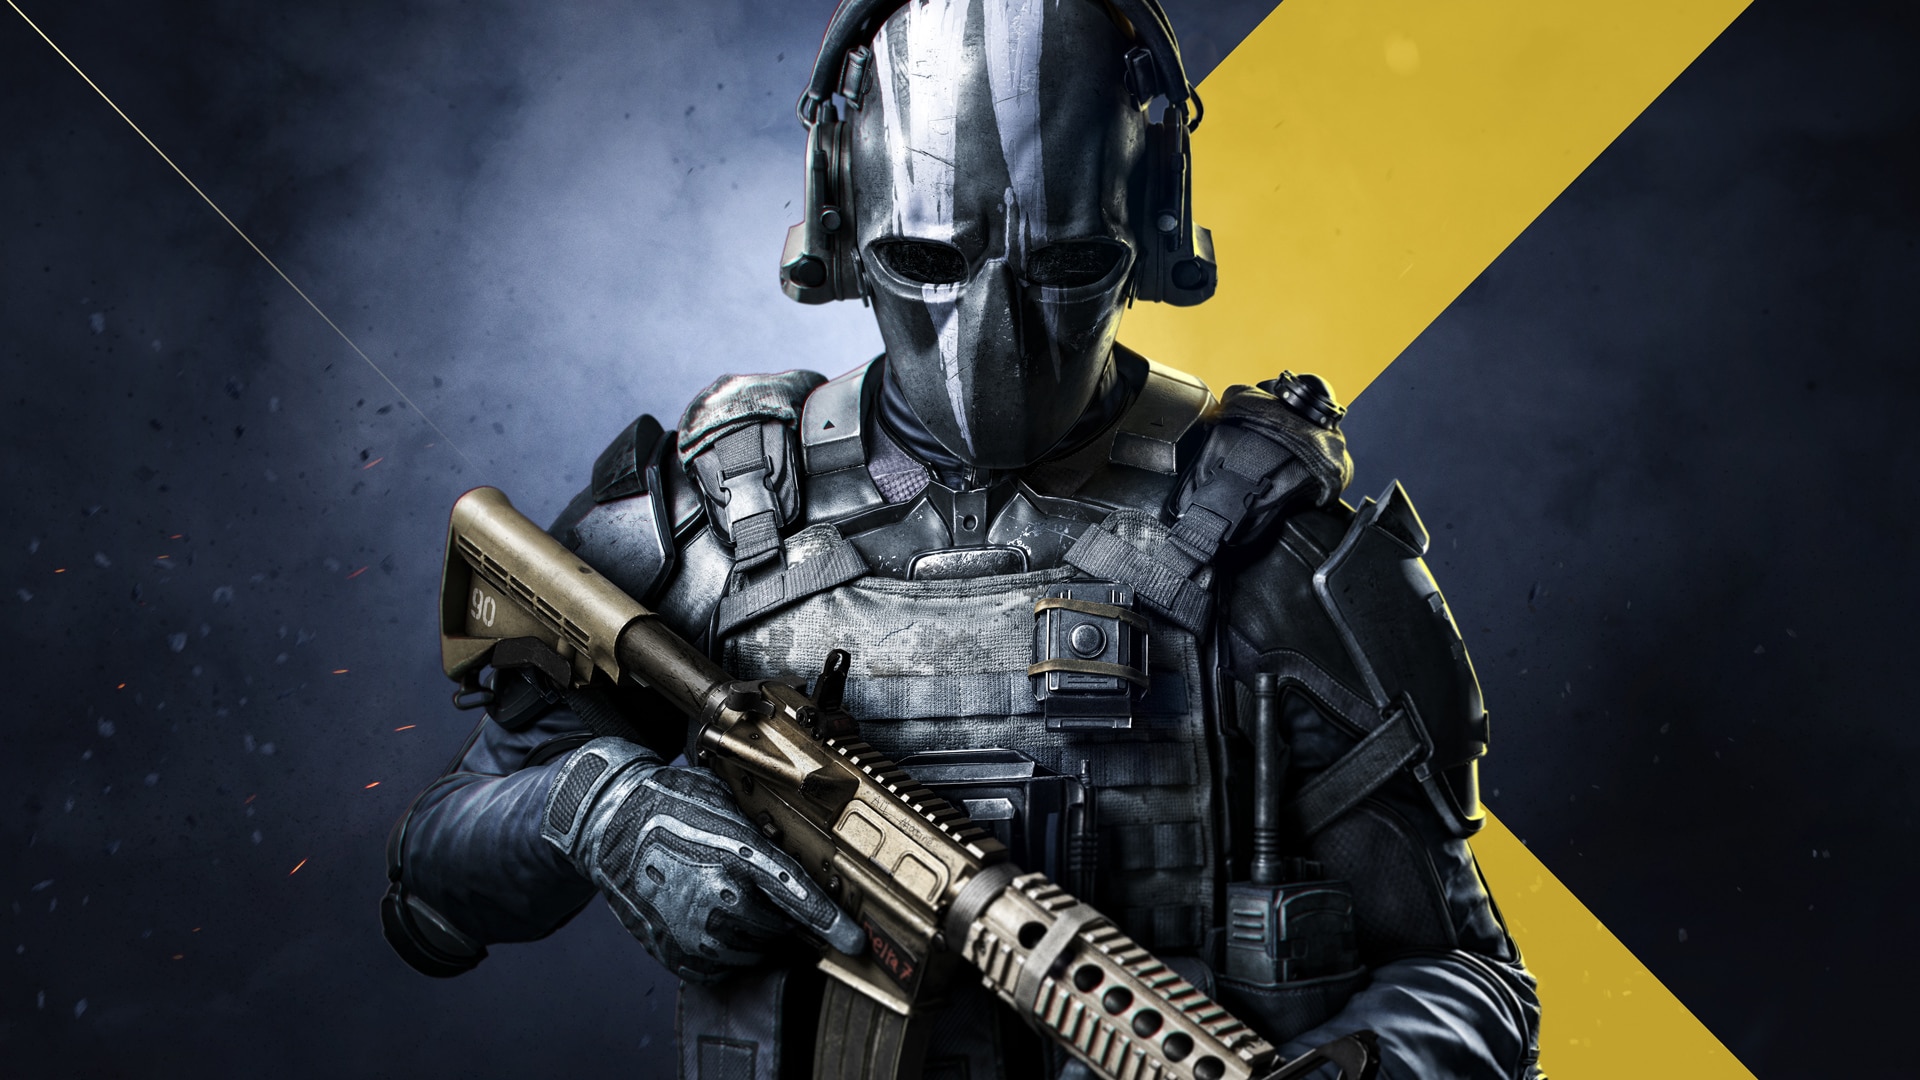 Rainbow Six Mobile — Ubisoft Mobile Technical Support and Help Center